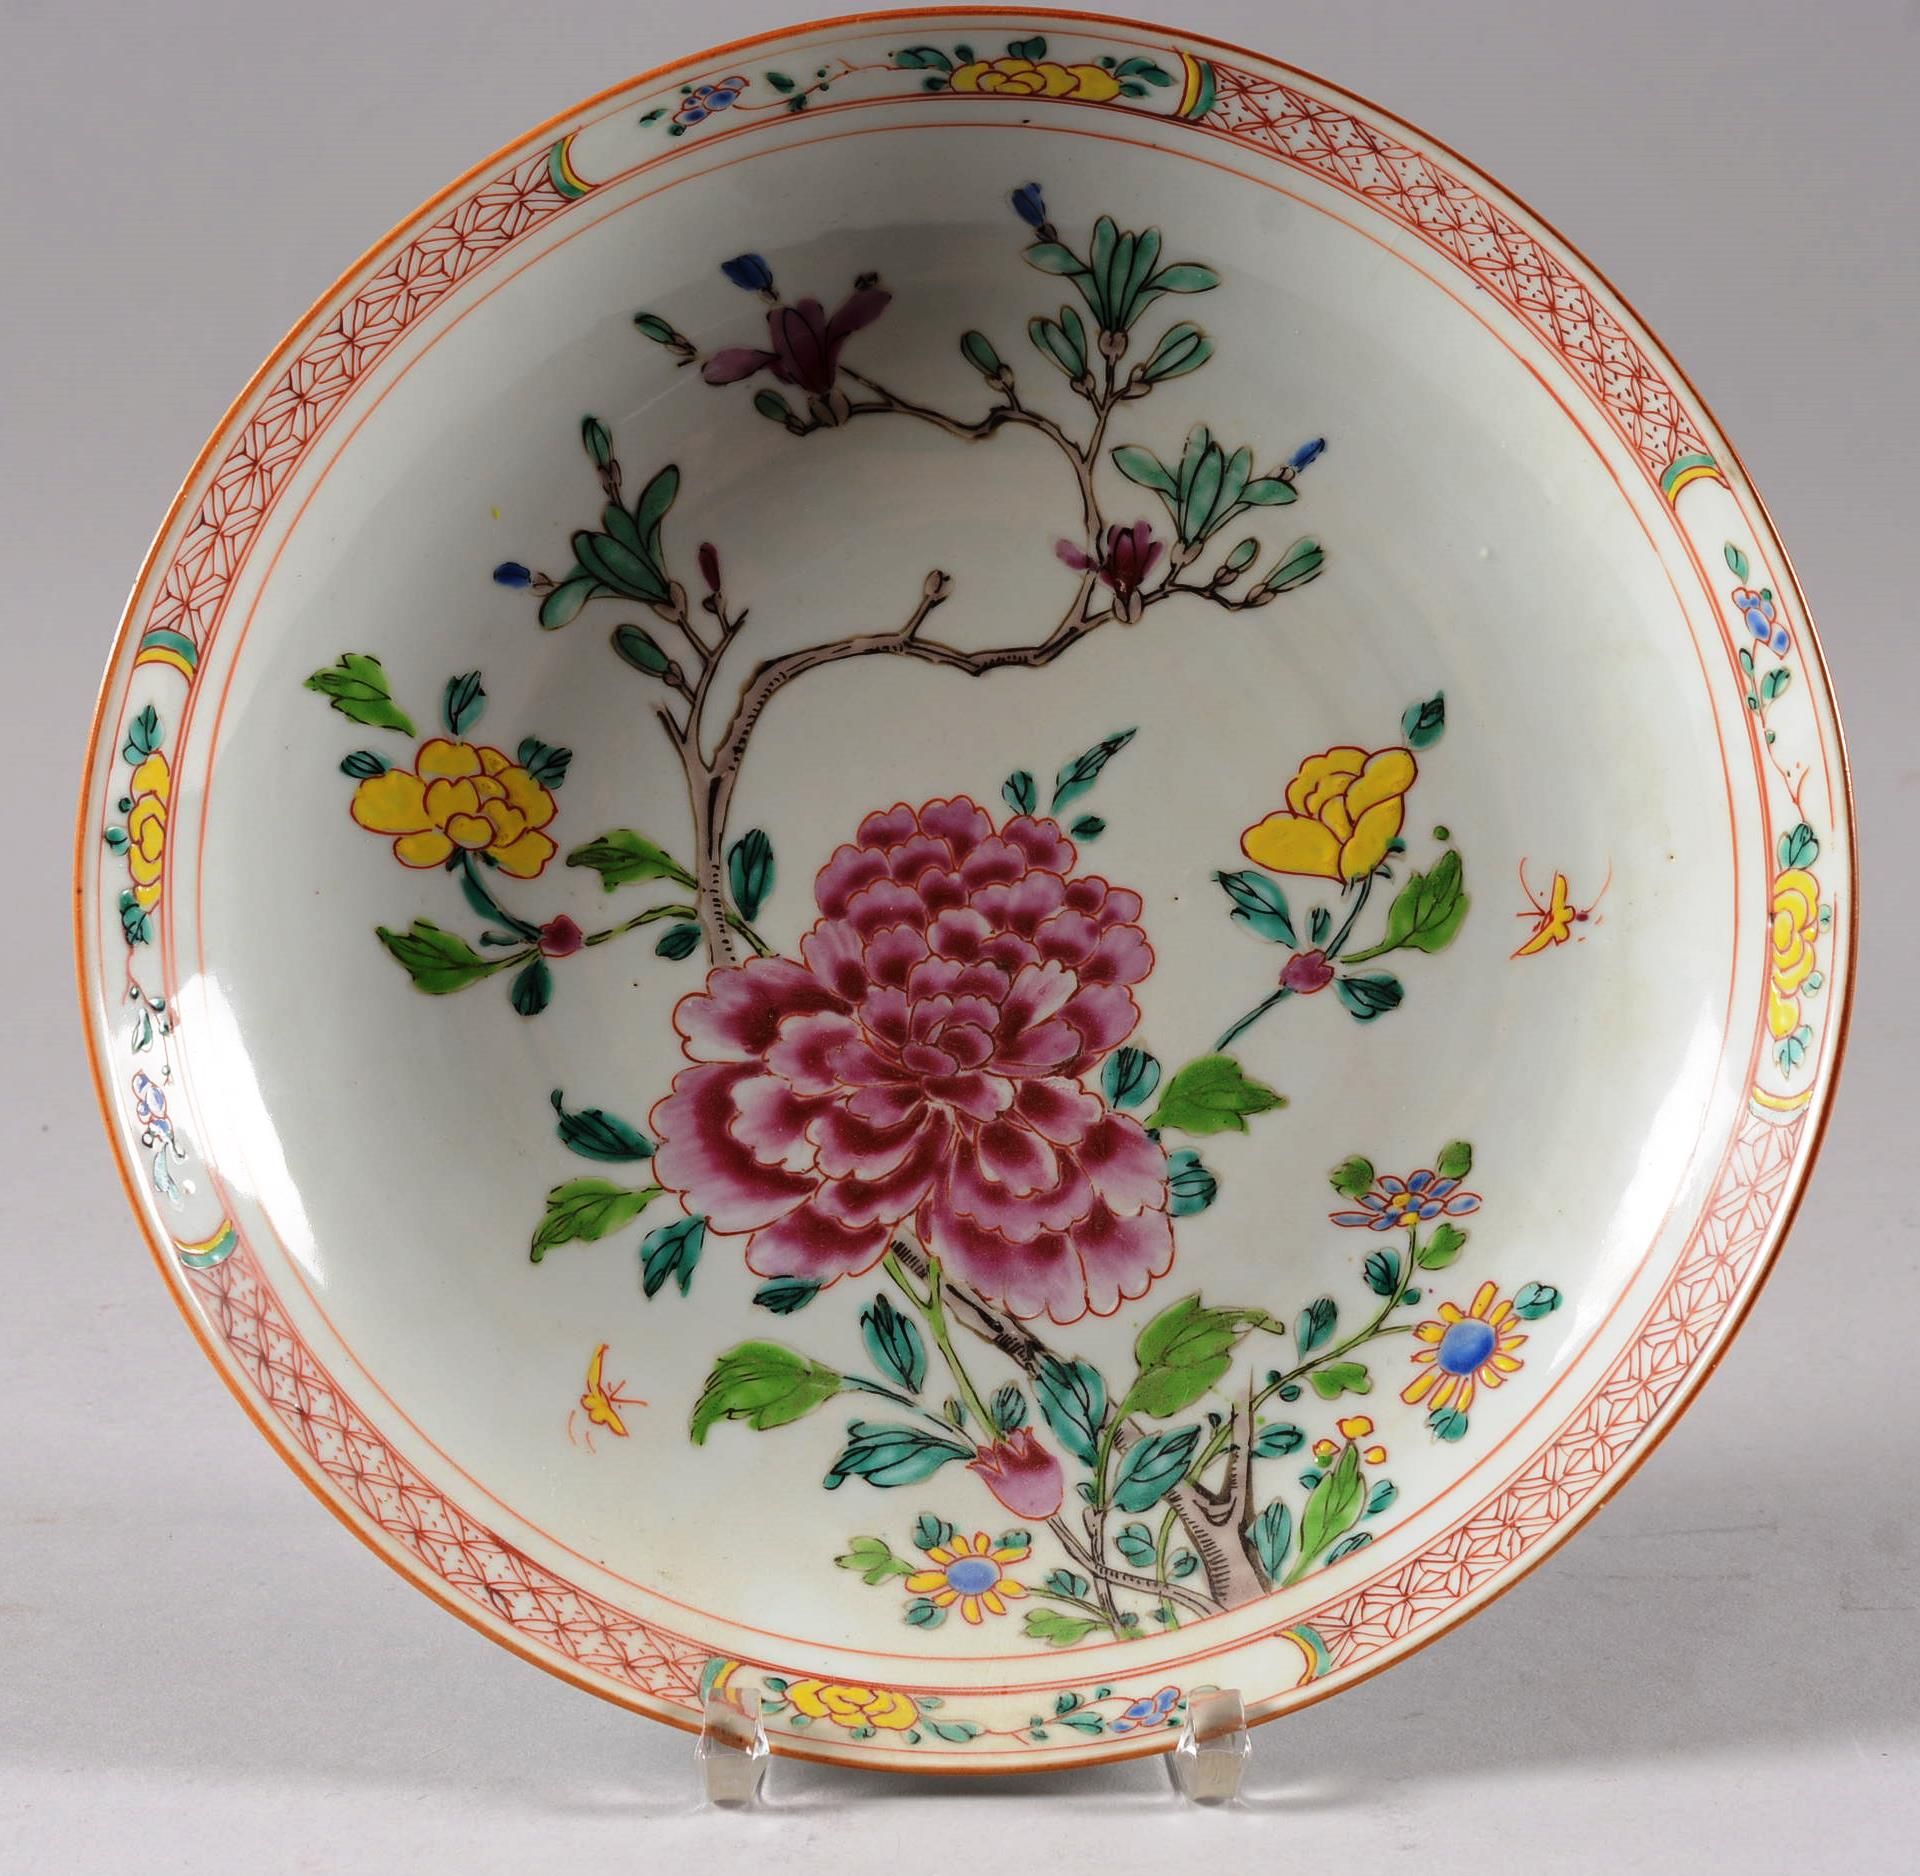 Coupe circulaire en porcelaine chinoise CHINA.

Runde Schale aus chinesischem Po&hellip;